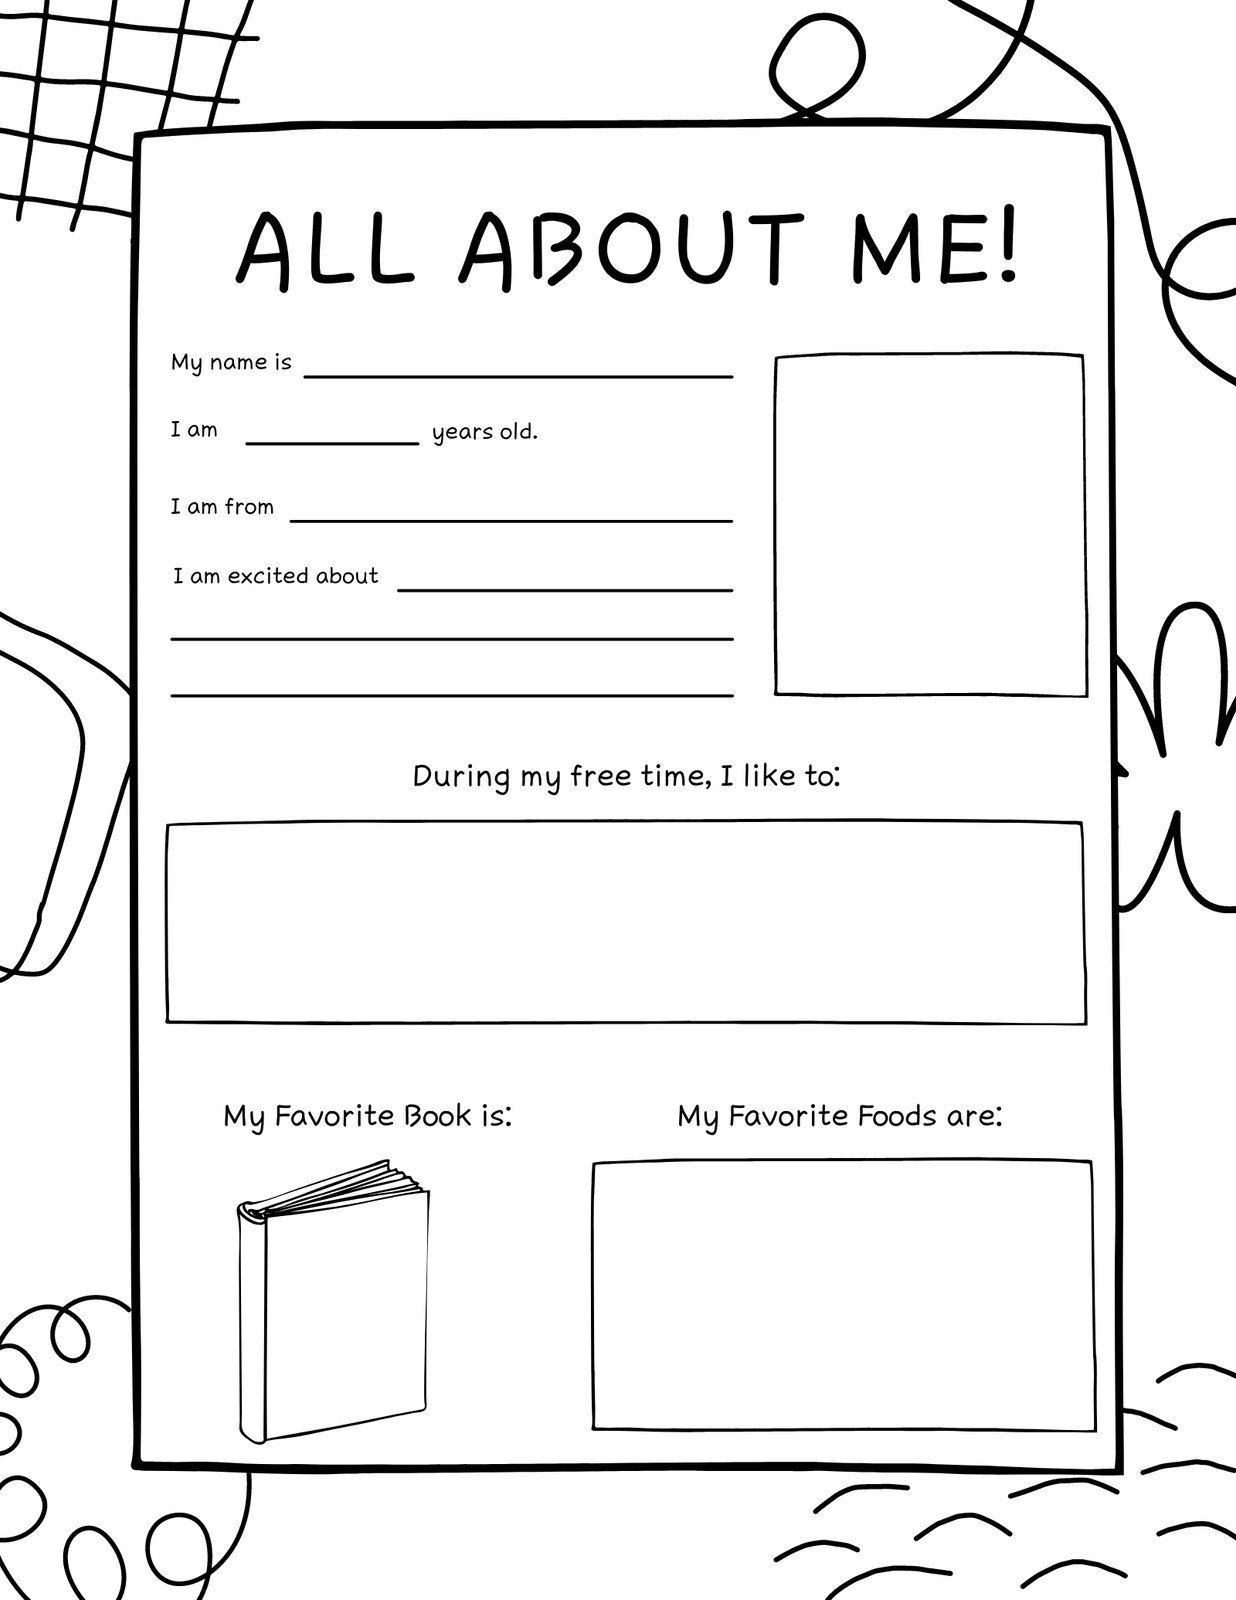 free-printable-all-about-me-templates-word-pdf-worksheet-teachers